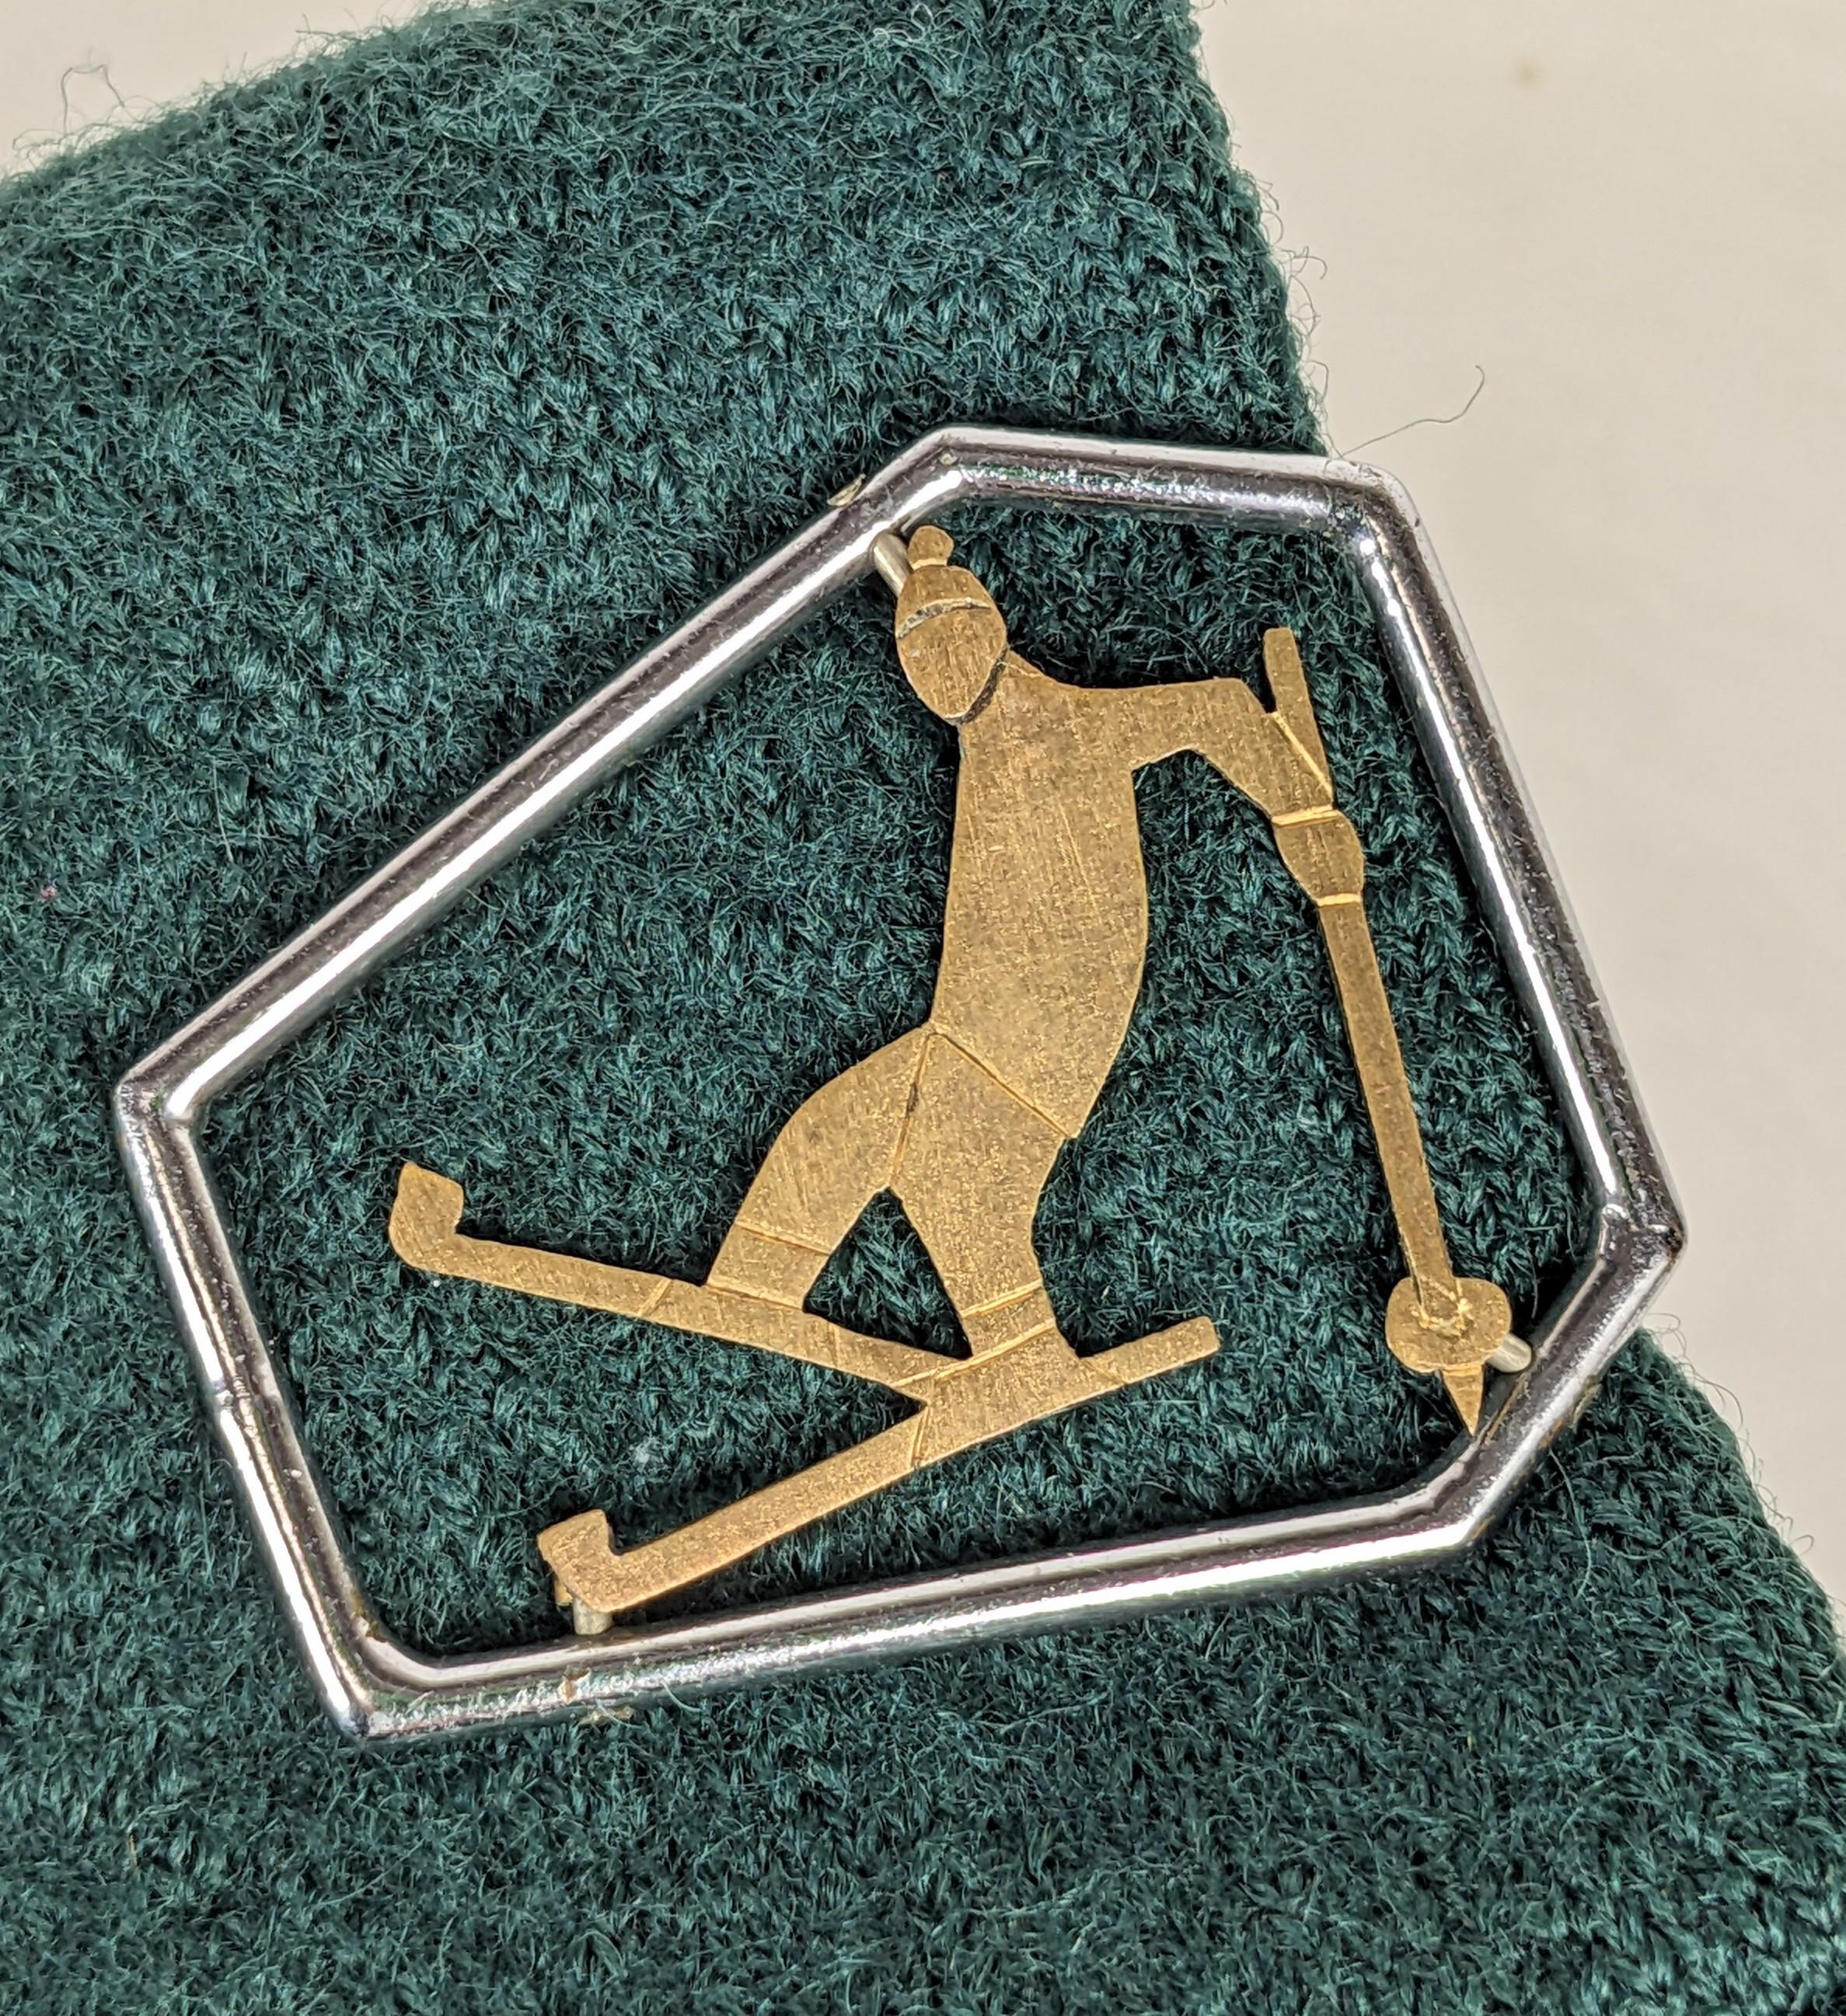 Charming French Art Deco Sport Clip hand made of brushed brass and chrome of a falling skier in the period Deco style. Works best on heavier fabrics on garment areas like neckline or lapel. 
1920's France. 1.75